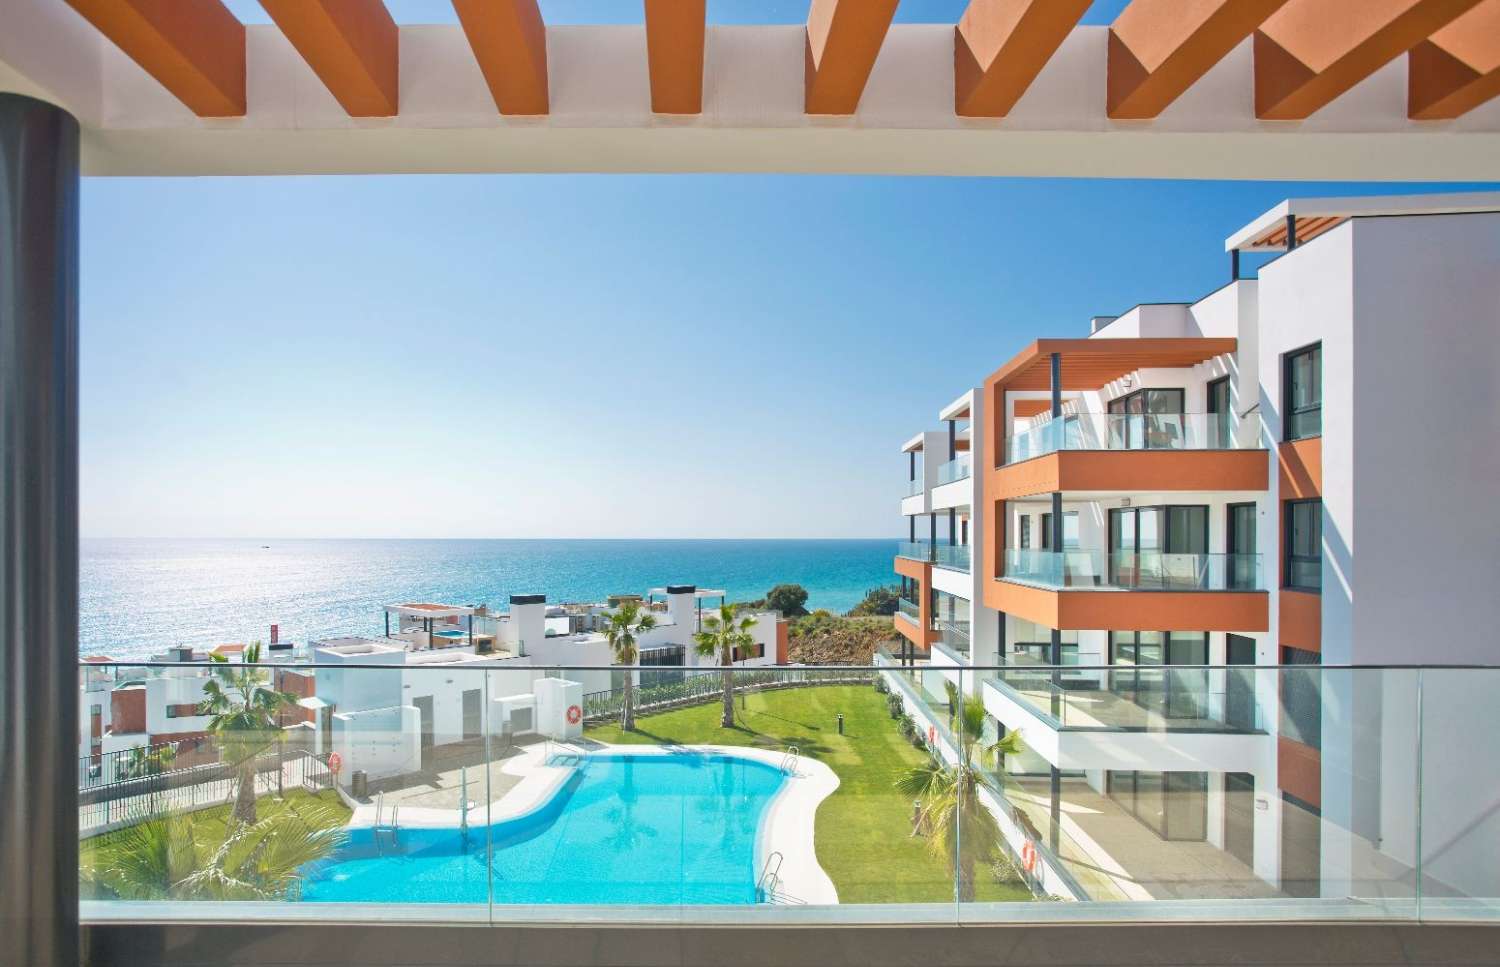 Spacious 3 bedroom apartment in a privileged location a few minutes from the beach with terrace of 62 m2